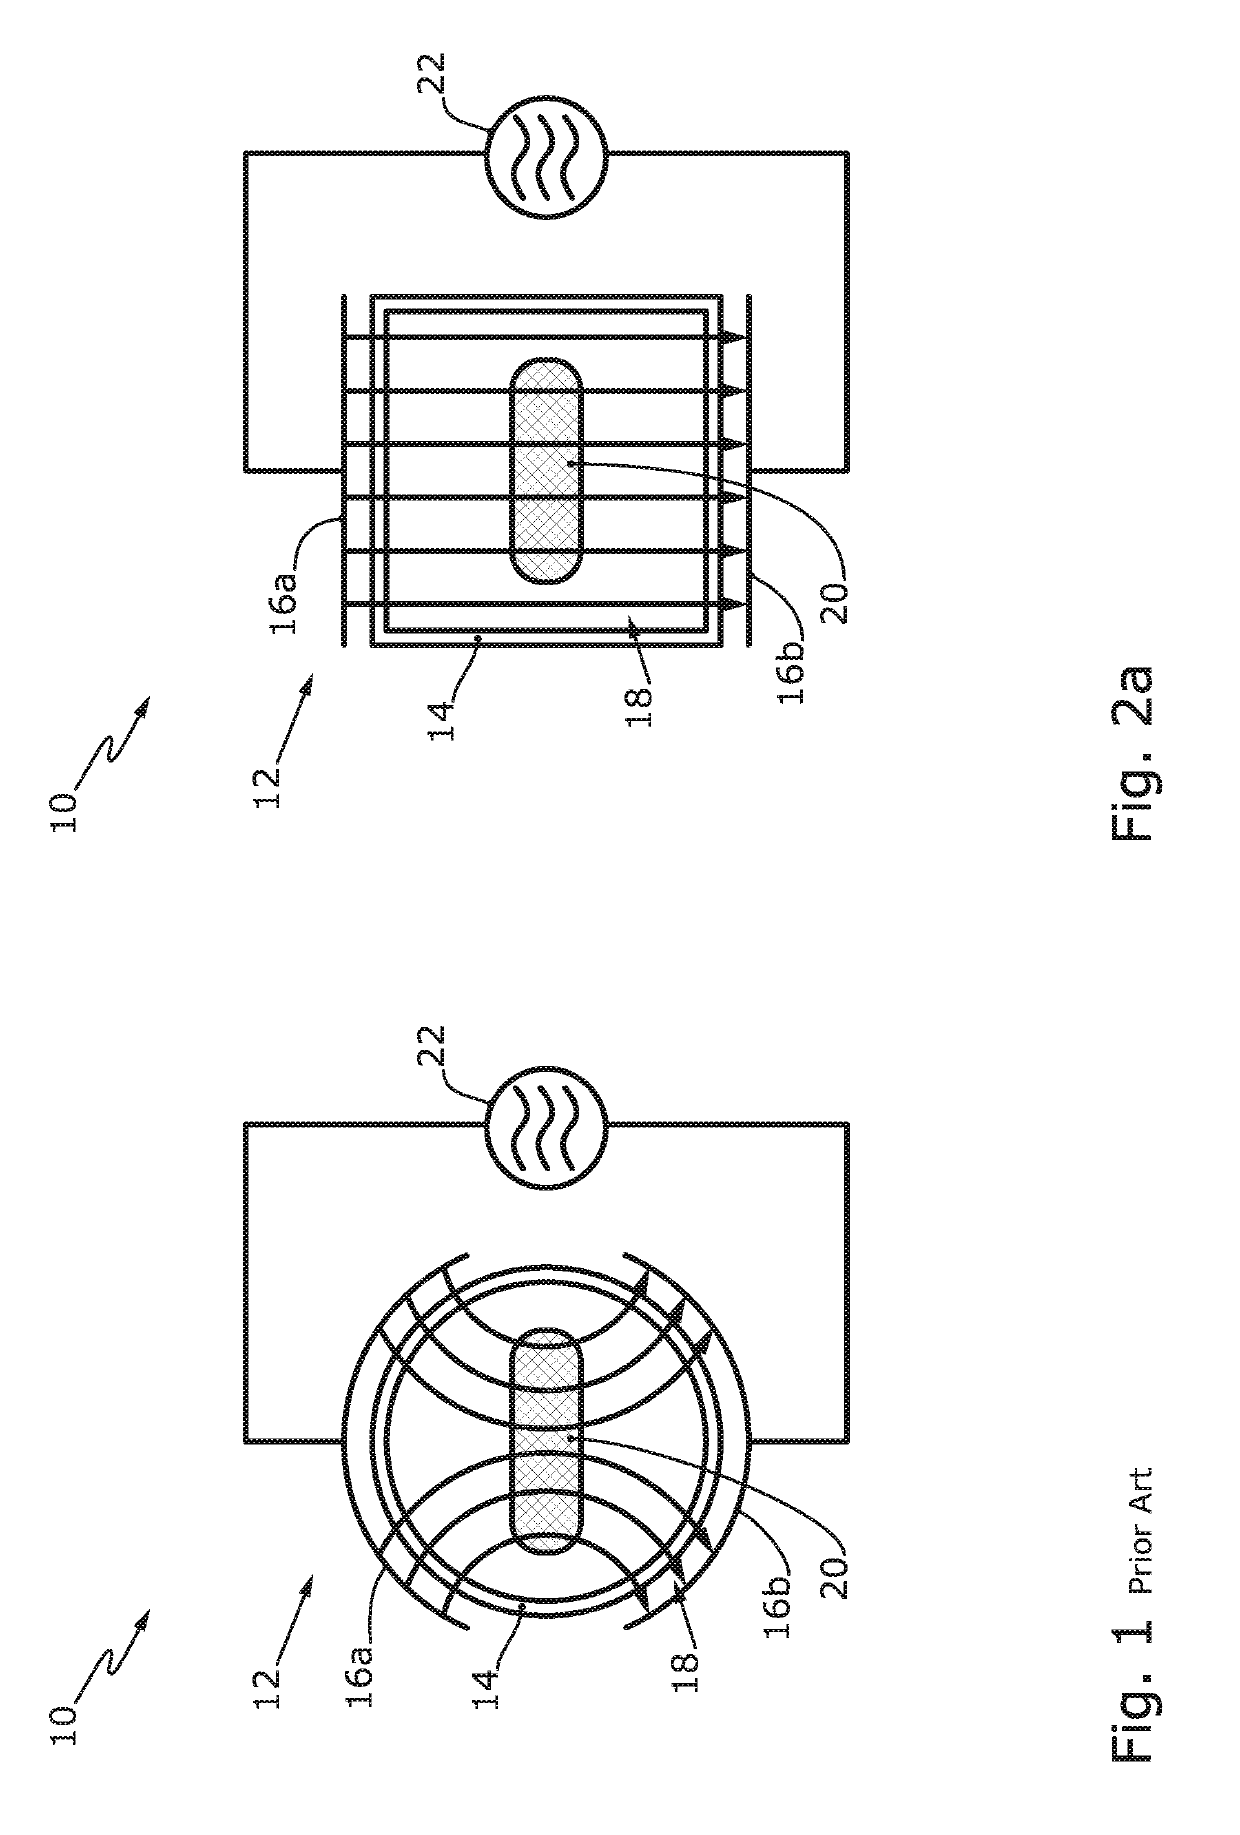 Low-pressure plasma chamber, low-pressure plasma installation and method for producing a low-pressure plasma chamber